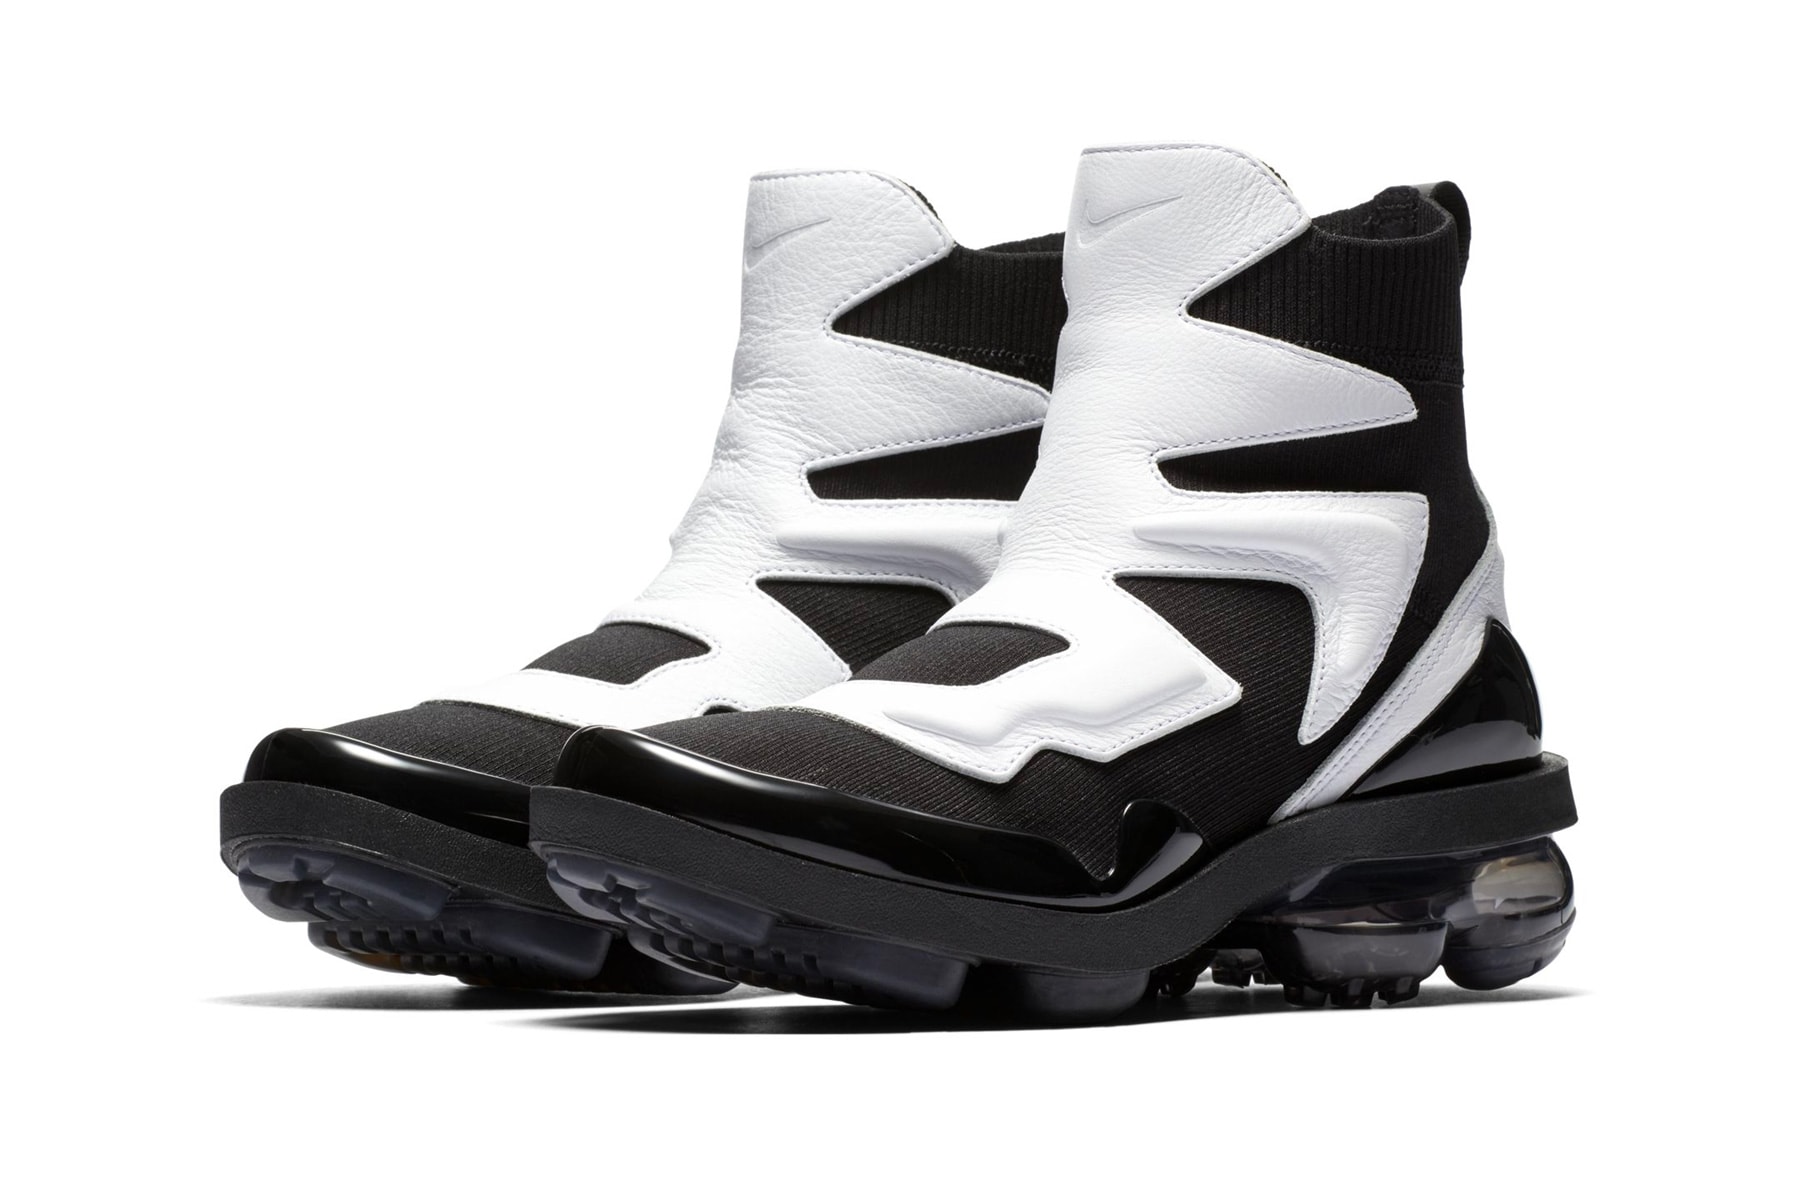 Nike Air VaporMax Light 2 "Black/White" "All-Black" colorway sneaker boot release date price 